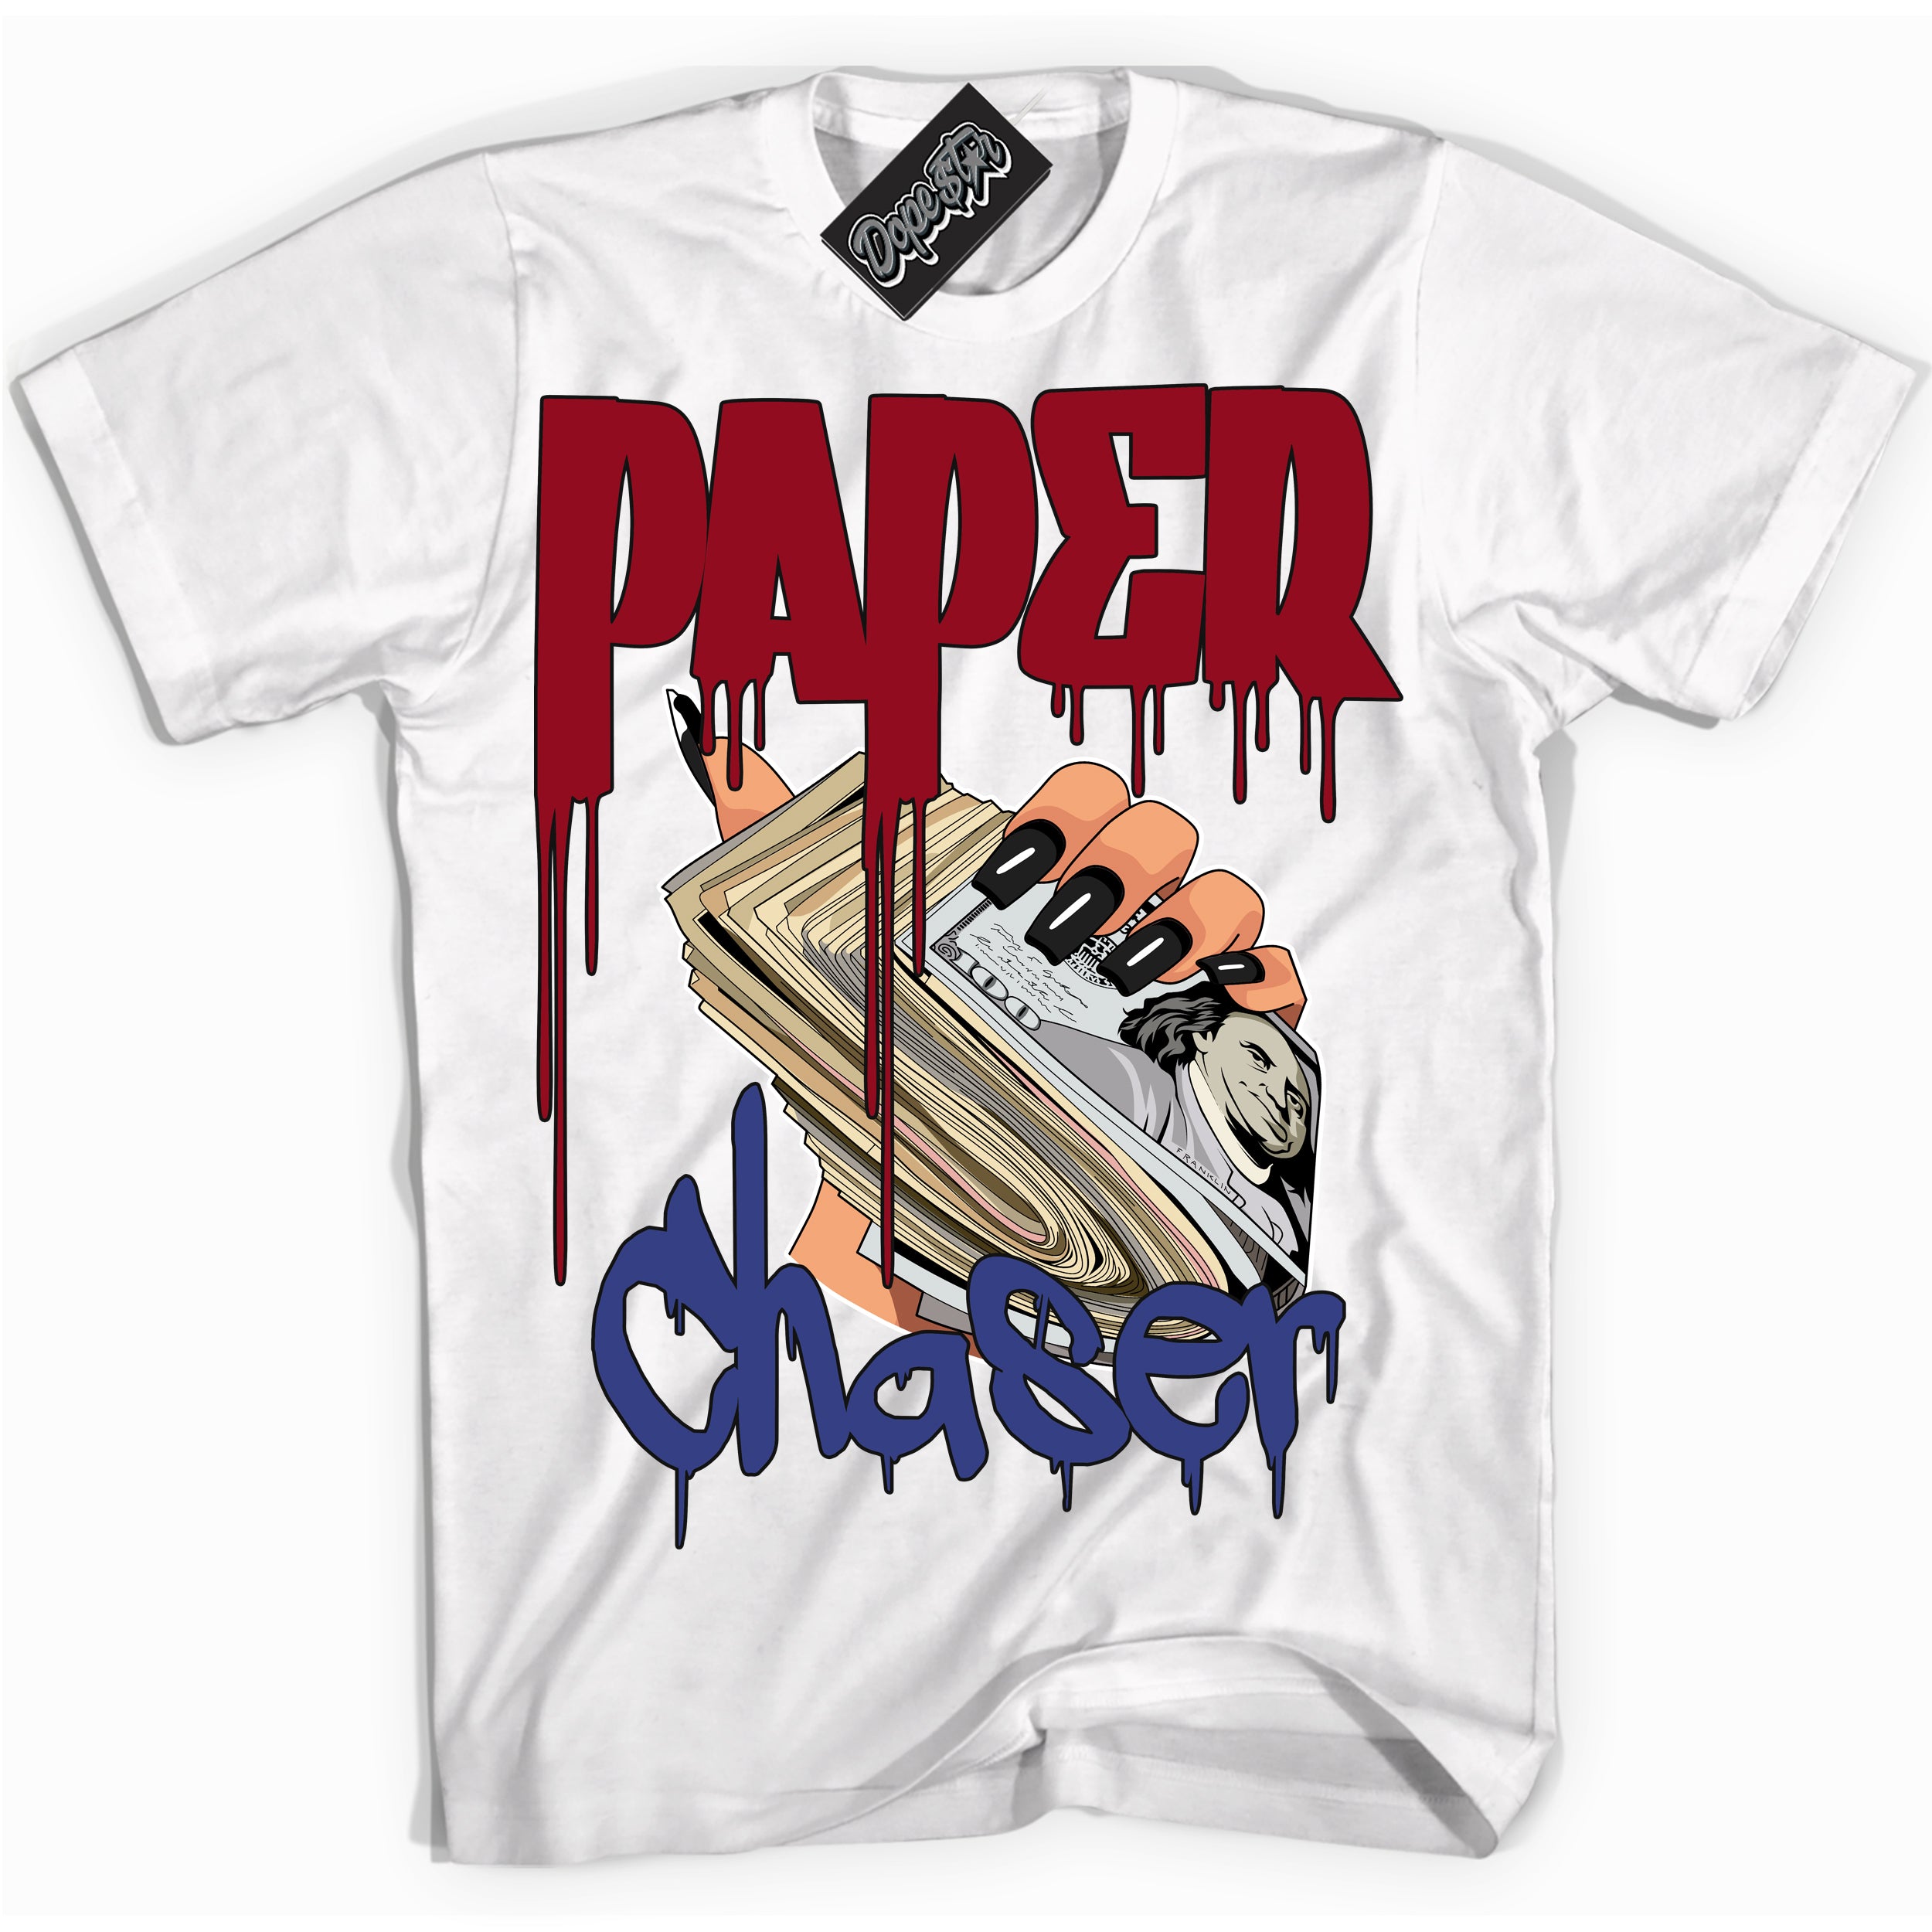 Cool White Shirt with “ Paper Chaser ” design that perfectly matches Playoffs 8s Sneakers.